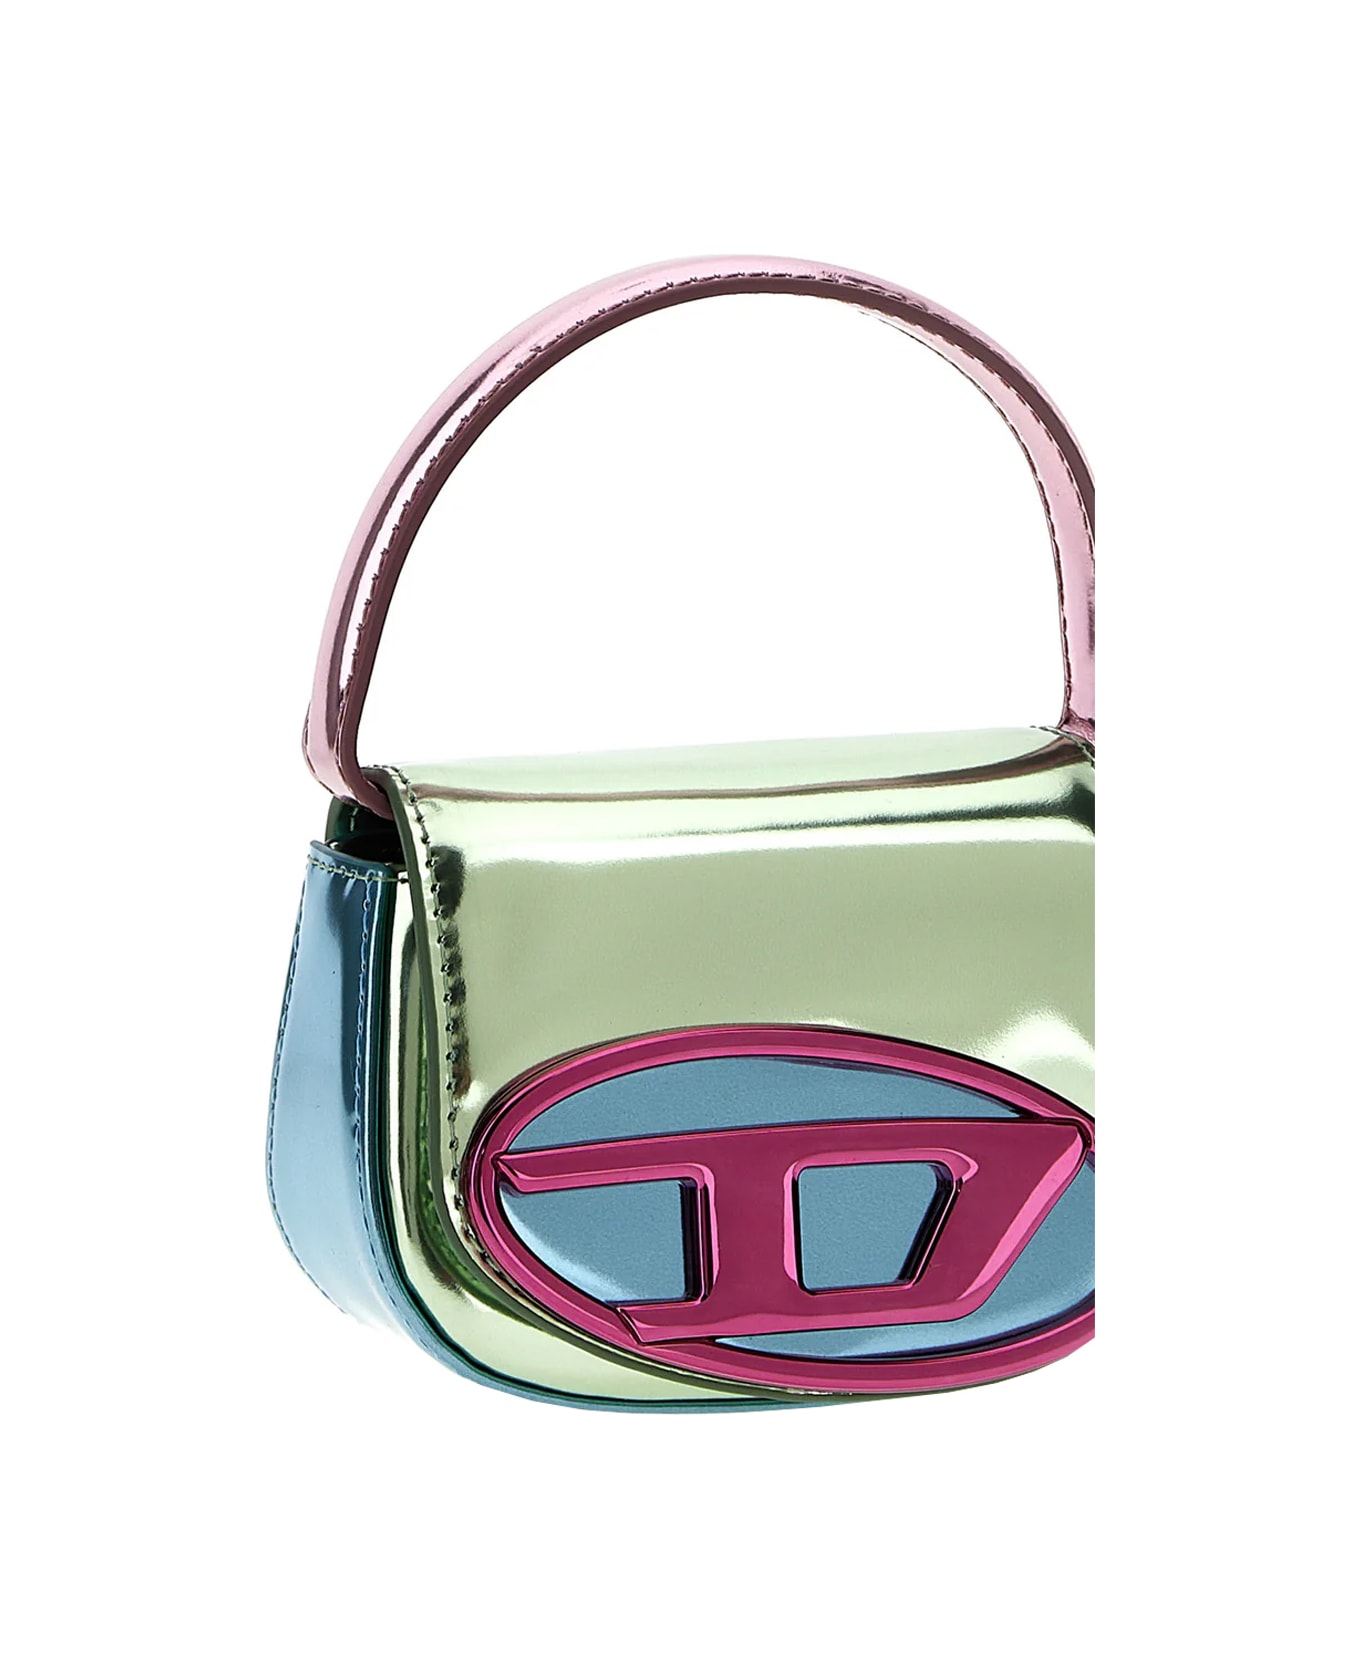 Diesel 1dr Xs Bag In Green And Blue Metallic Leather - Green